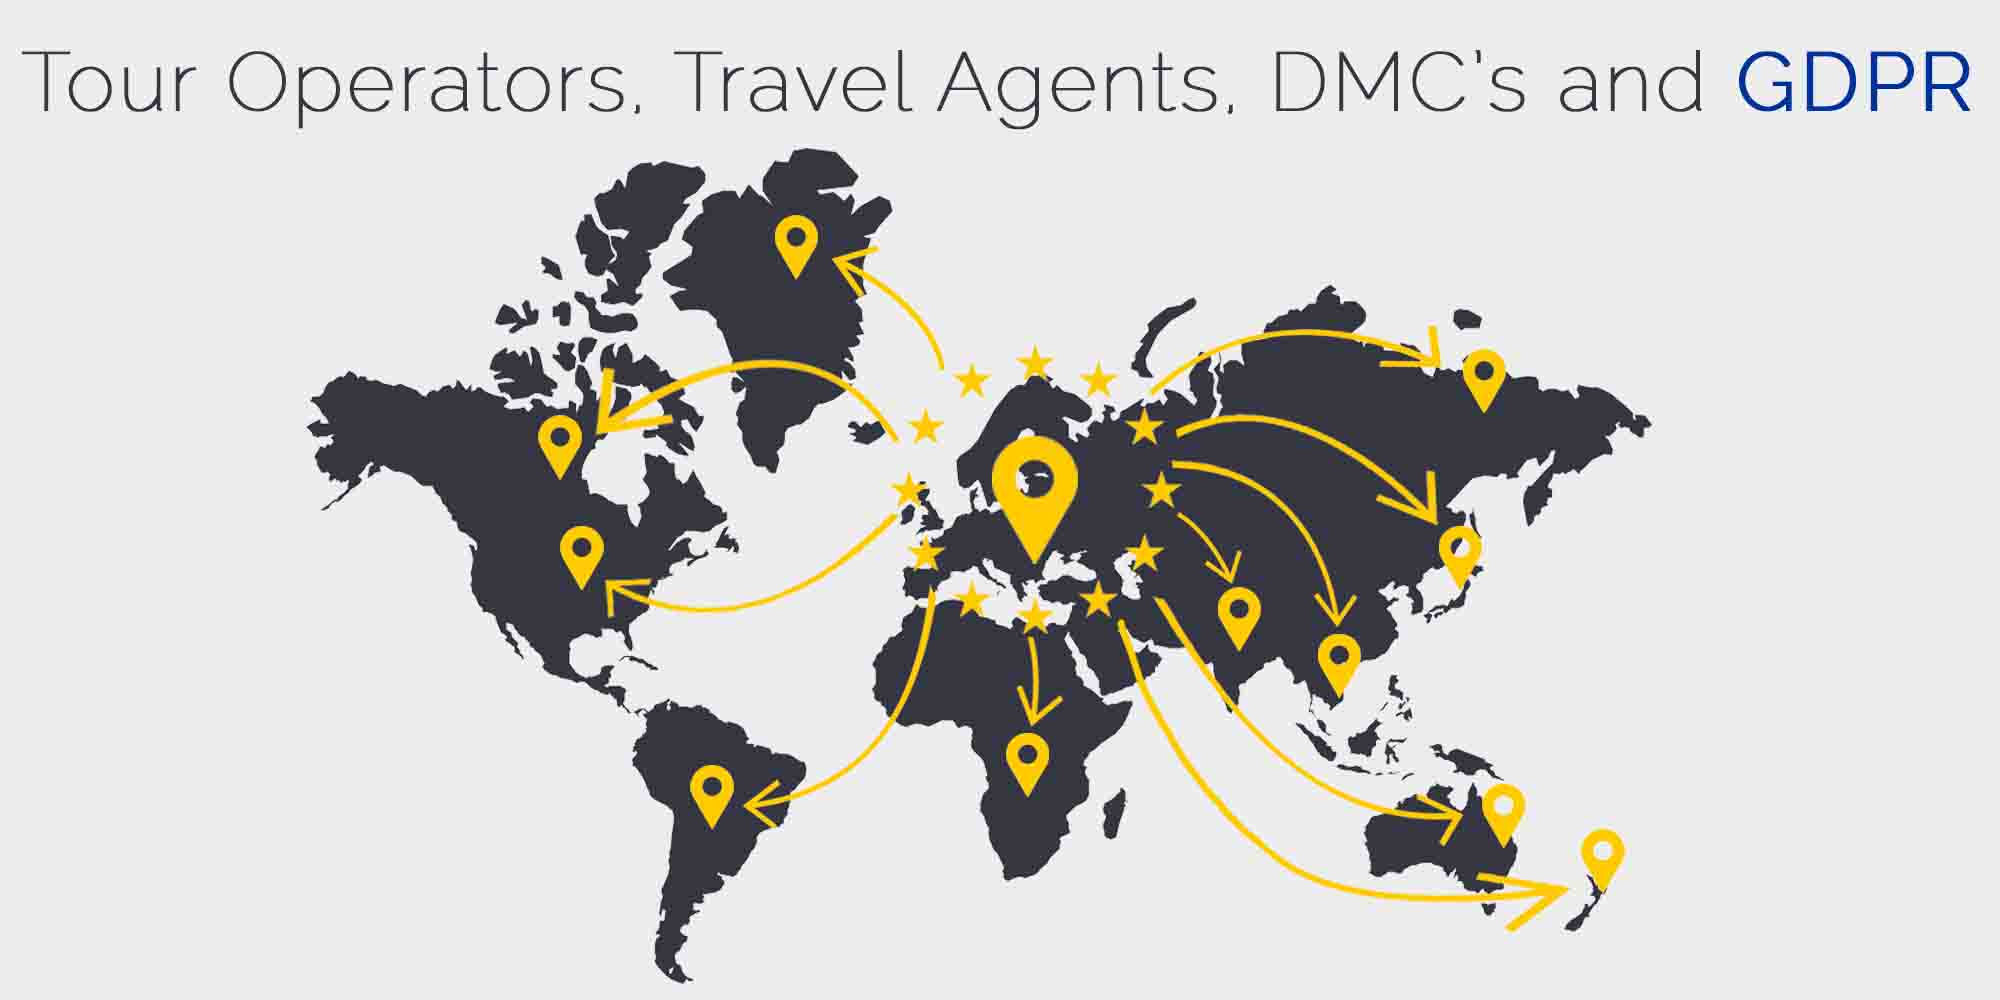 GDPR for Tour Operators, DMC's and Travel Agents